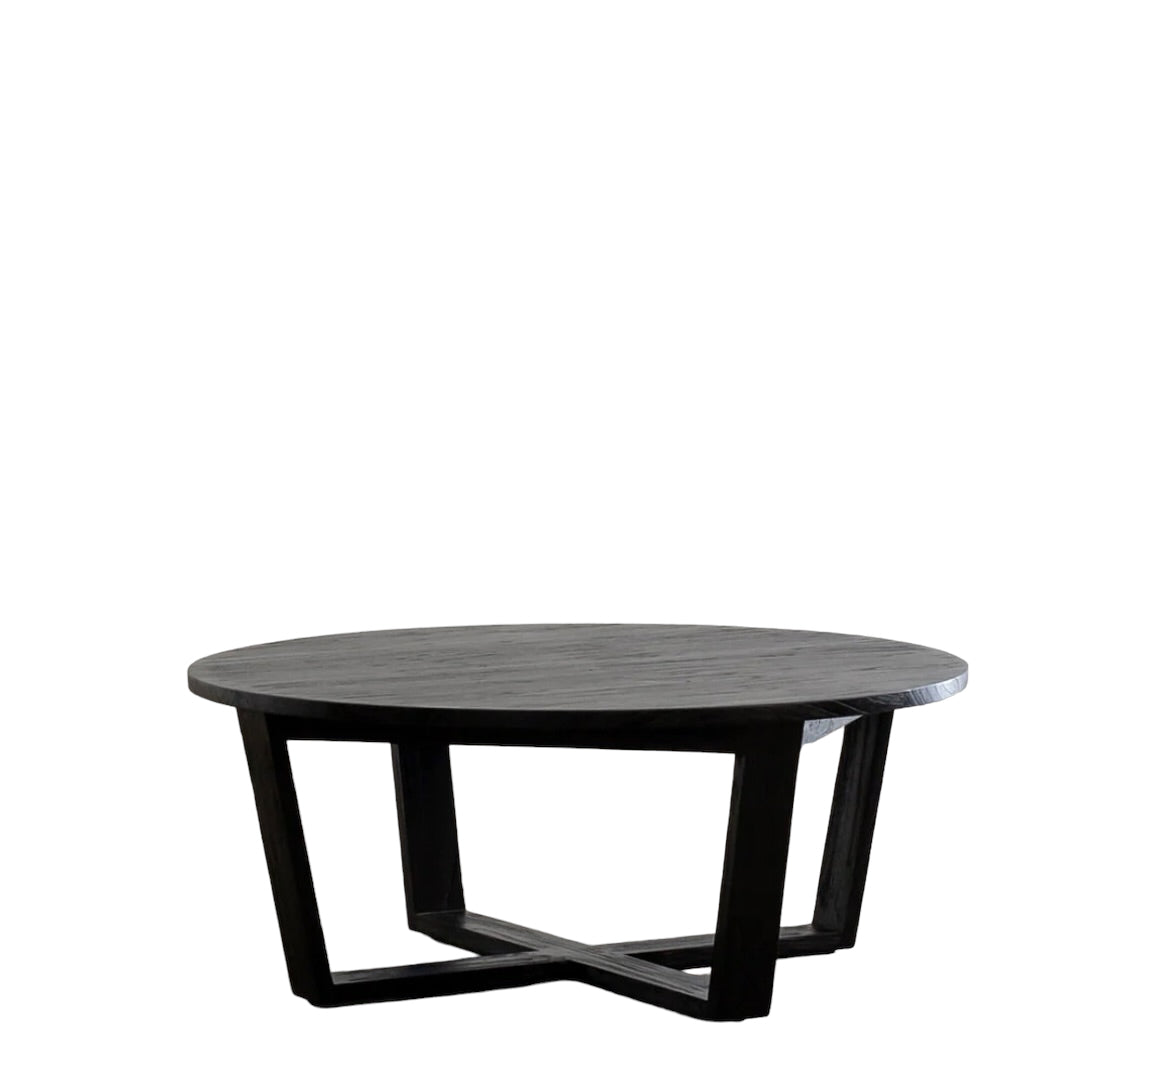 HAND MADE IVER BLACK SCANDINAVIAN ROUND WOOD COFFEE TABLE